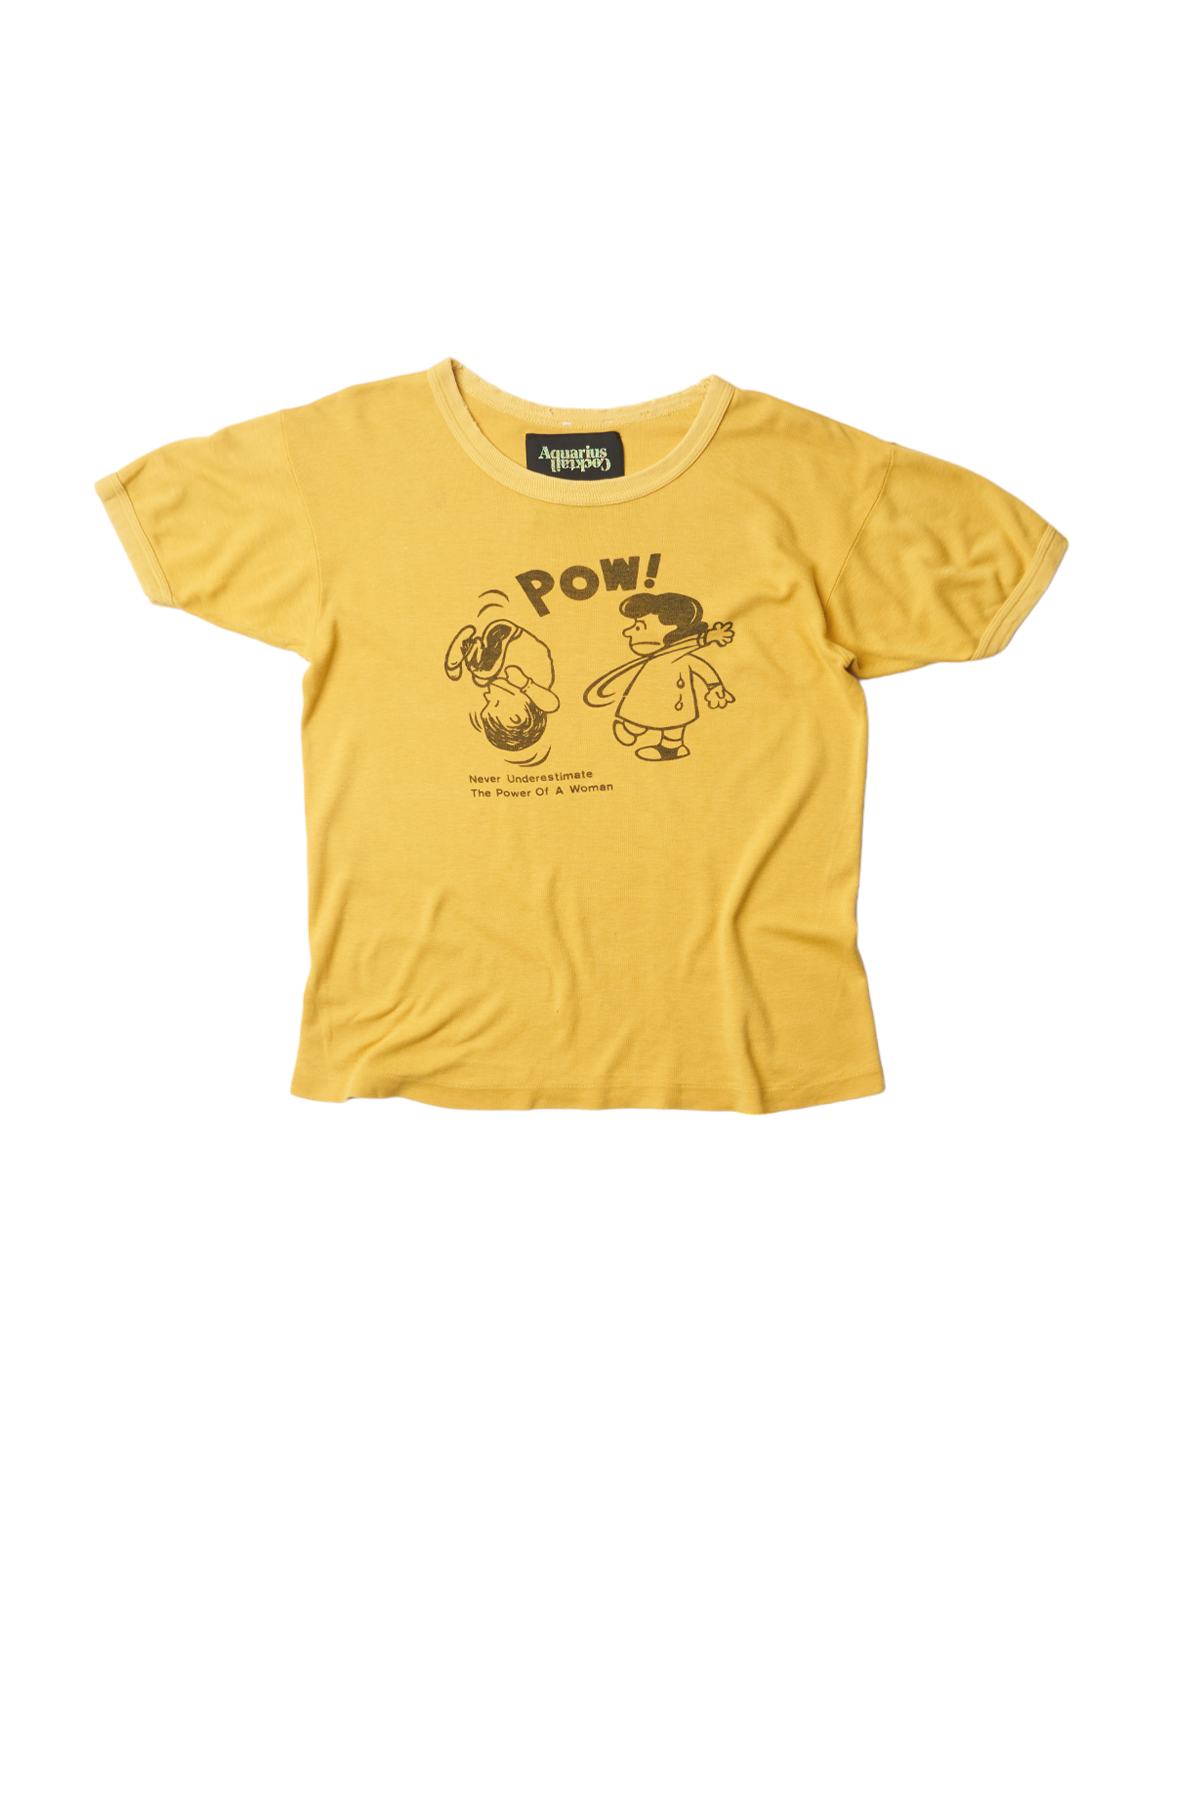 Vintage Charlie Brown and Lucy  Tee Shirt